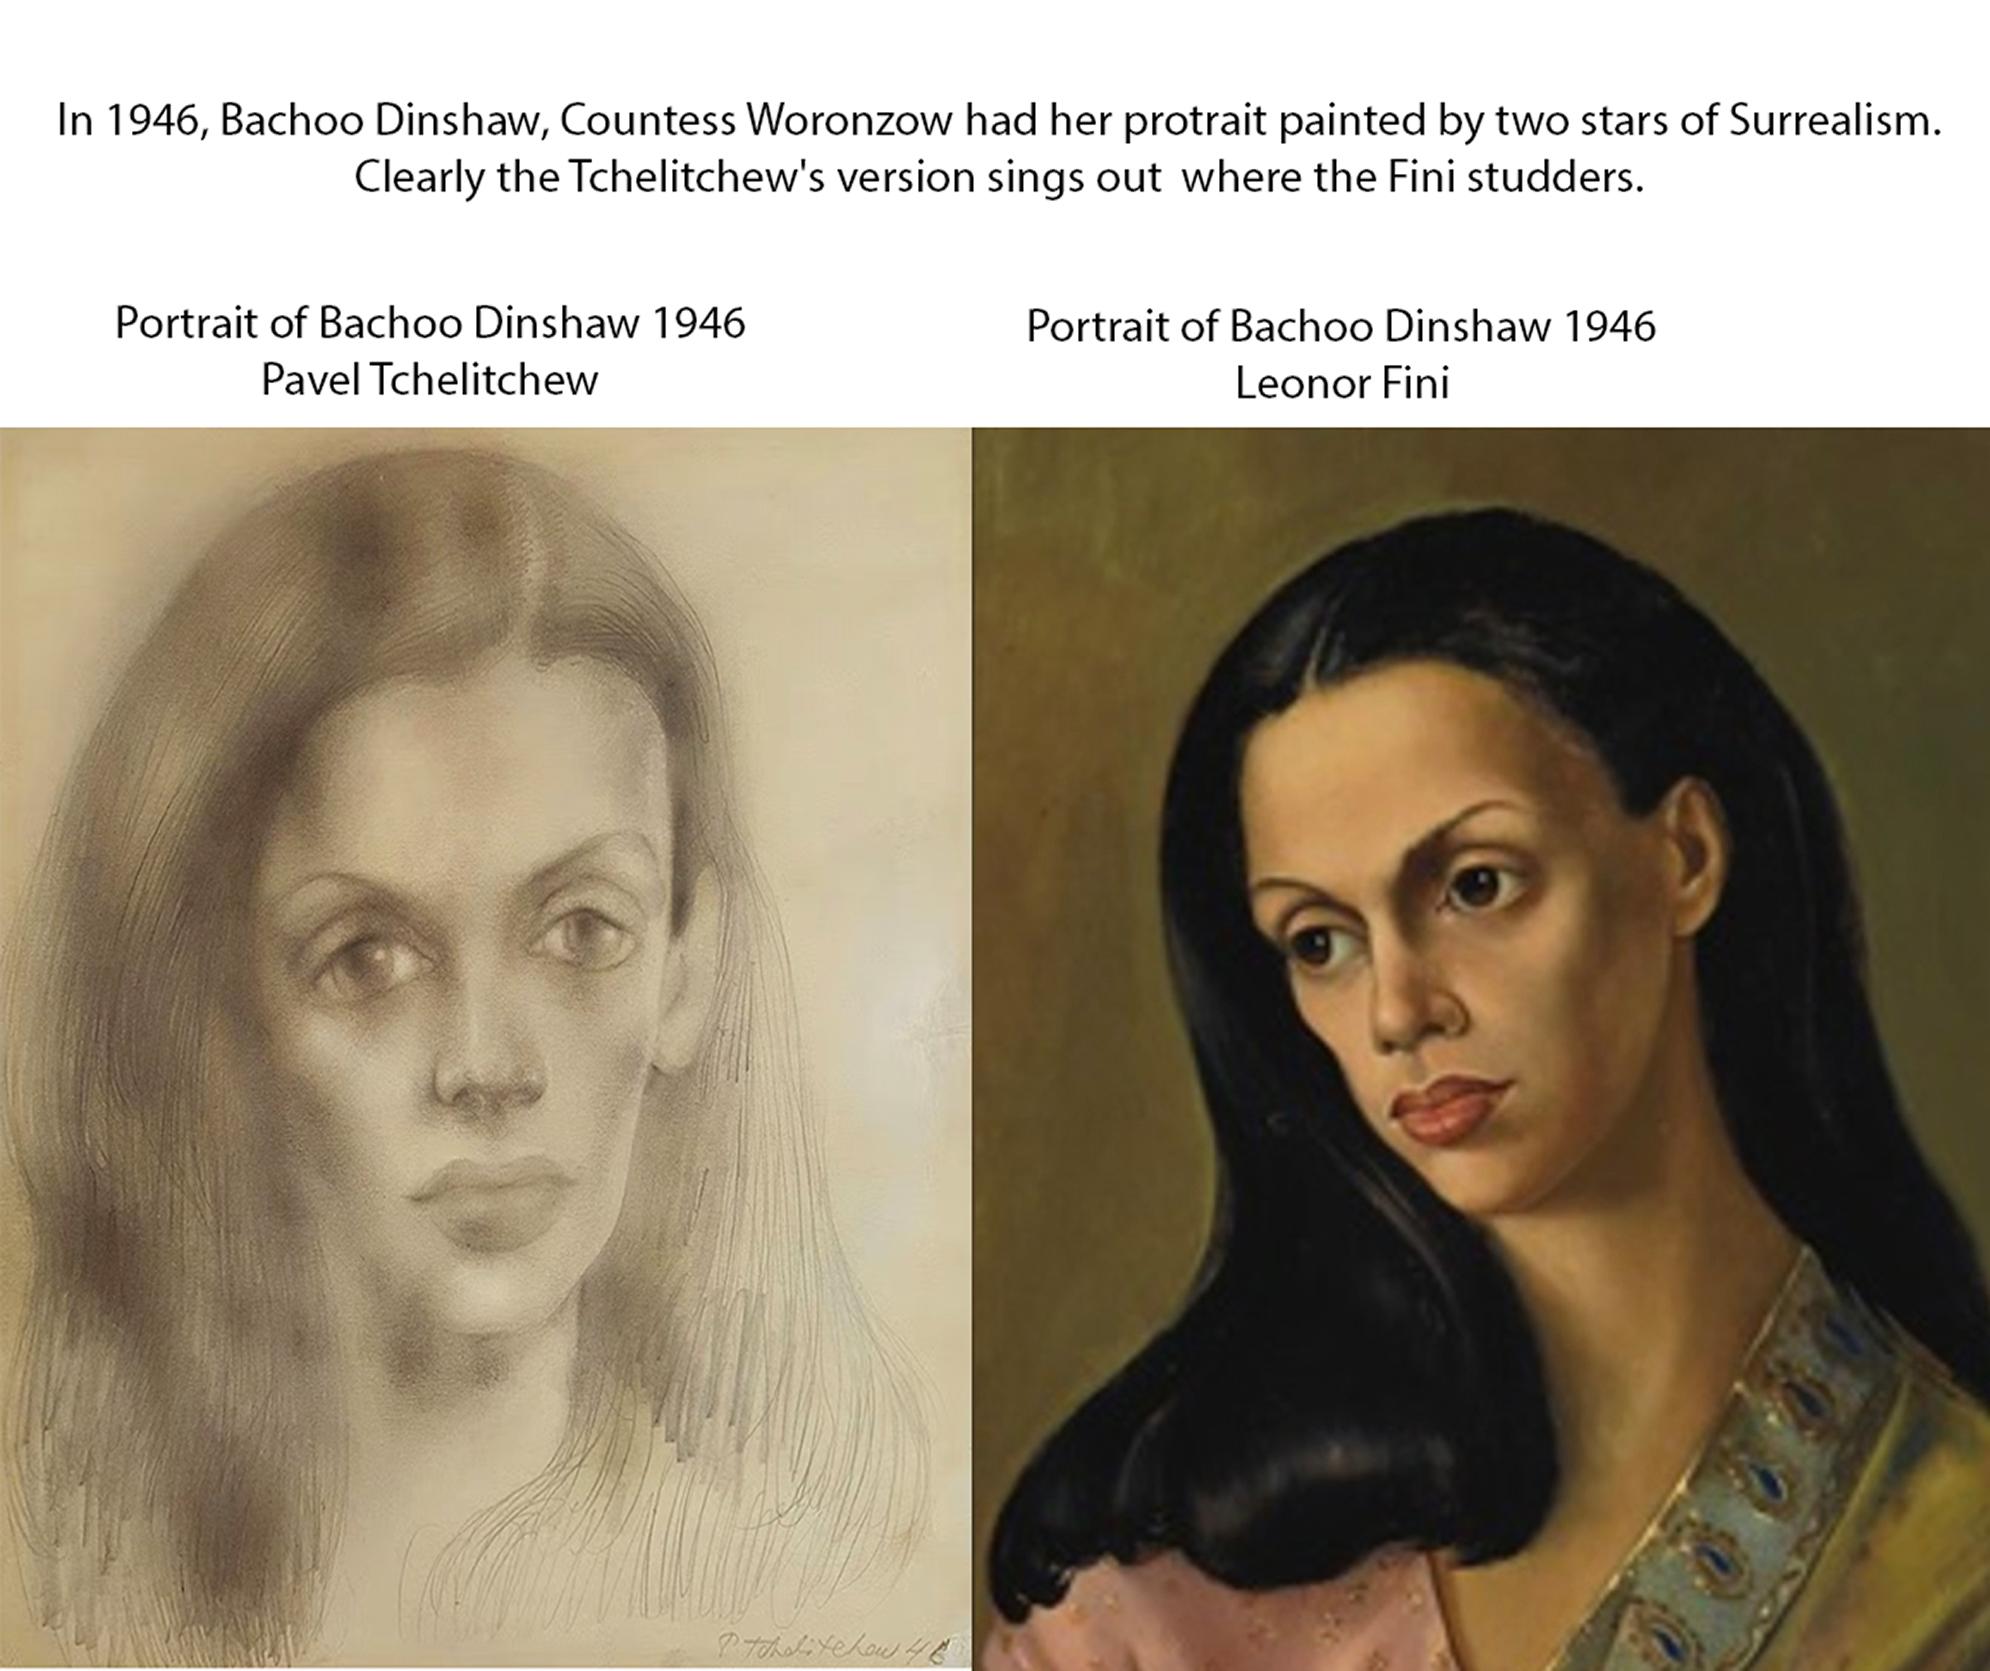 Powerful pencil study of Bachoo, Countess Woronzow. Tchelitchew exaggerates the sitters features with abnormally large eyes for dramatic effect, Bachoo (Countess Bachoobai Woronzow-Dashkow, 1914-2003) and her brother Edulji Framroze Dinshaw